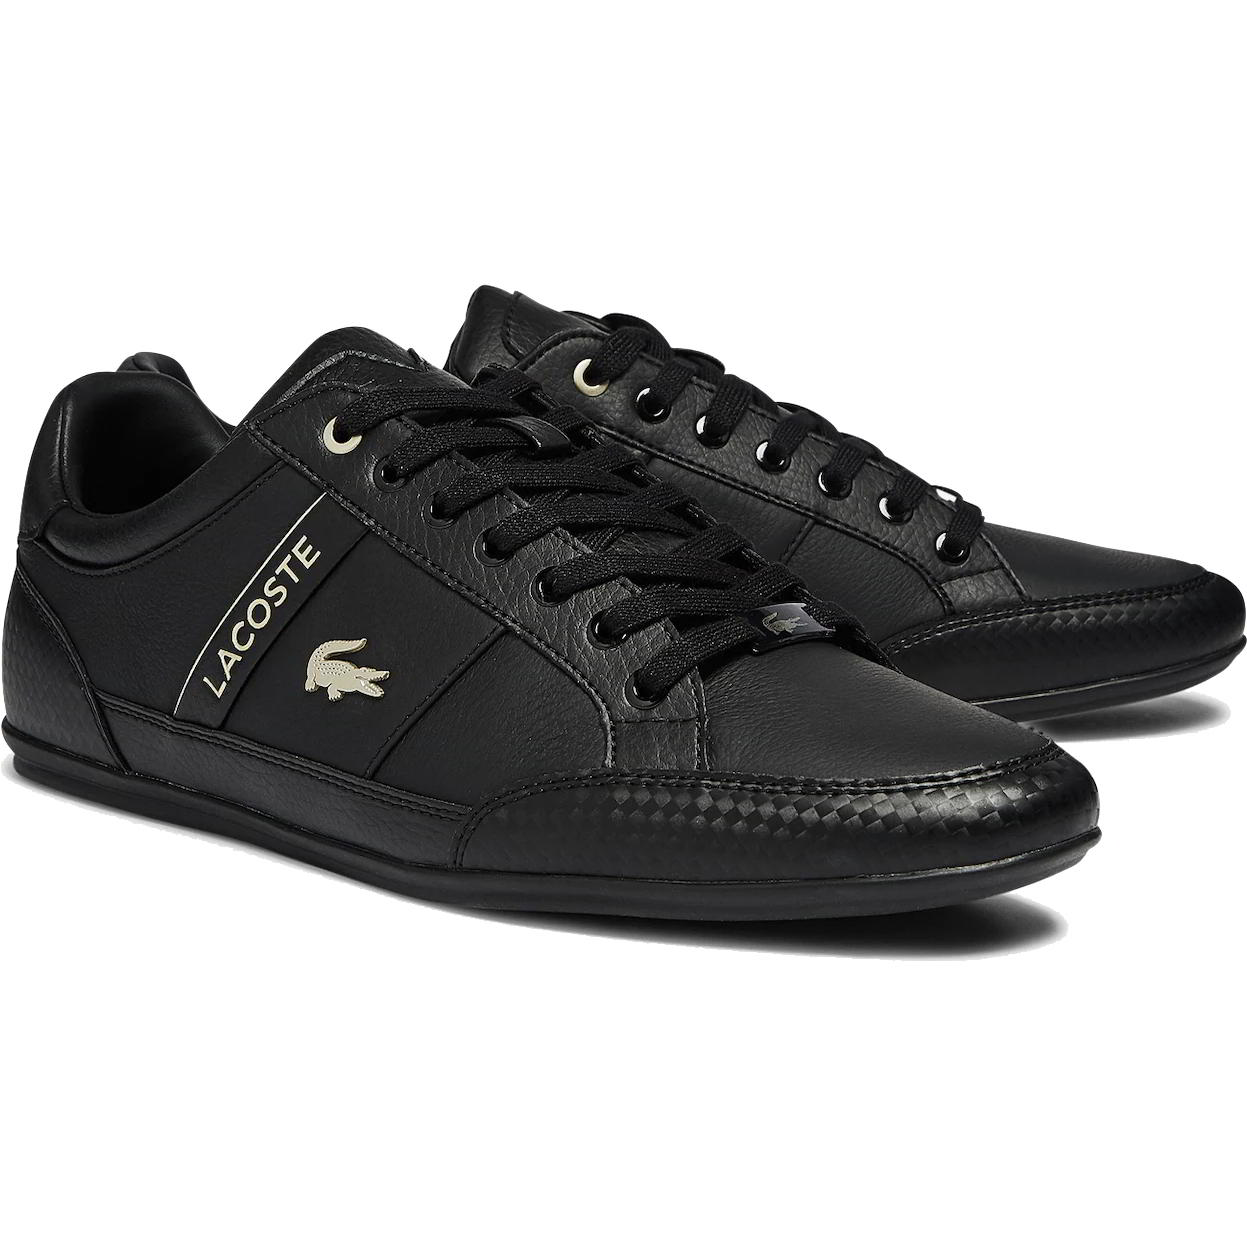 Lacoste Mens Chaymon 721 Tainers Shoes - UK 11 Black 2951